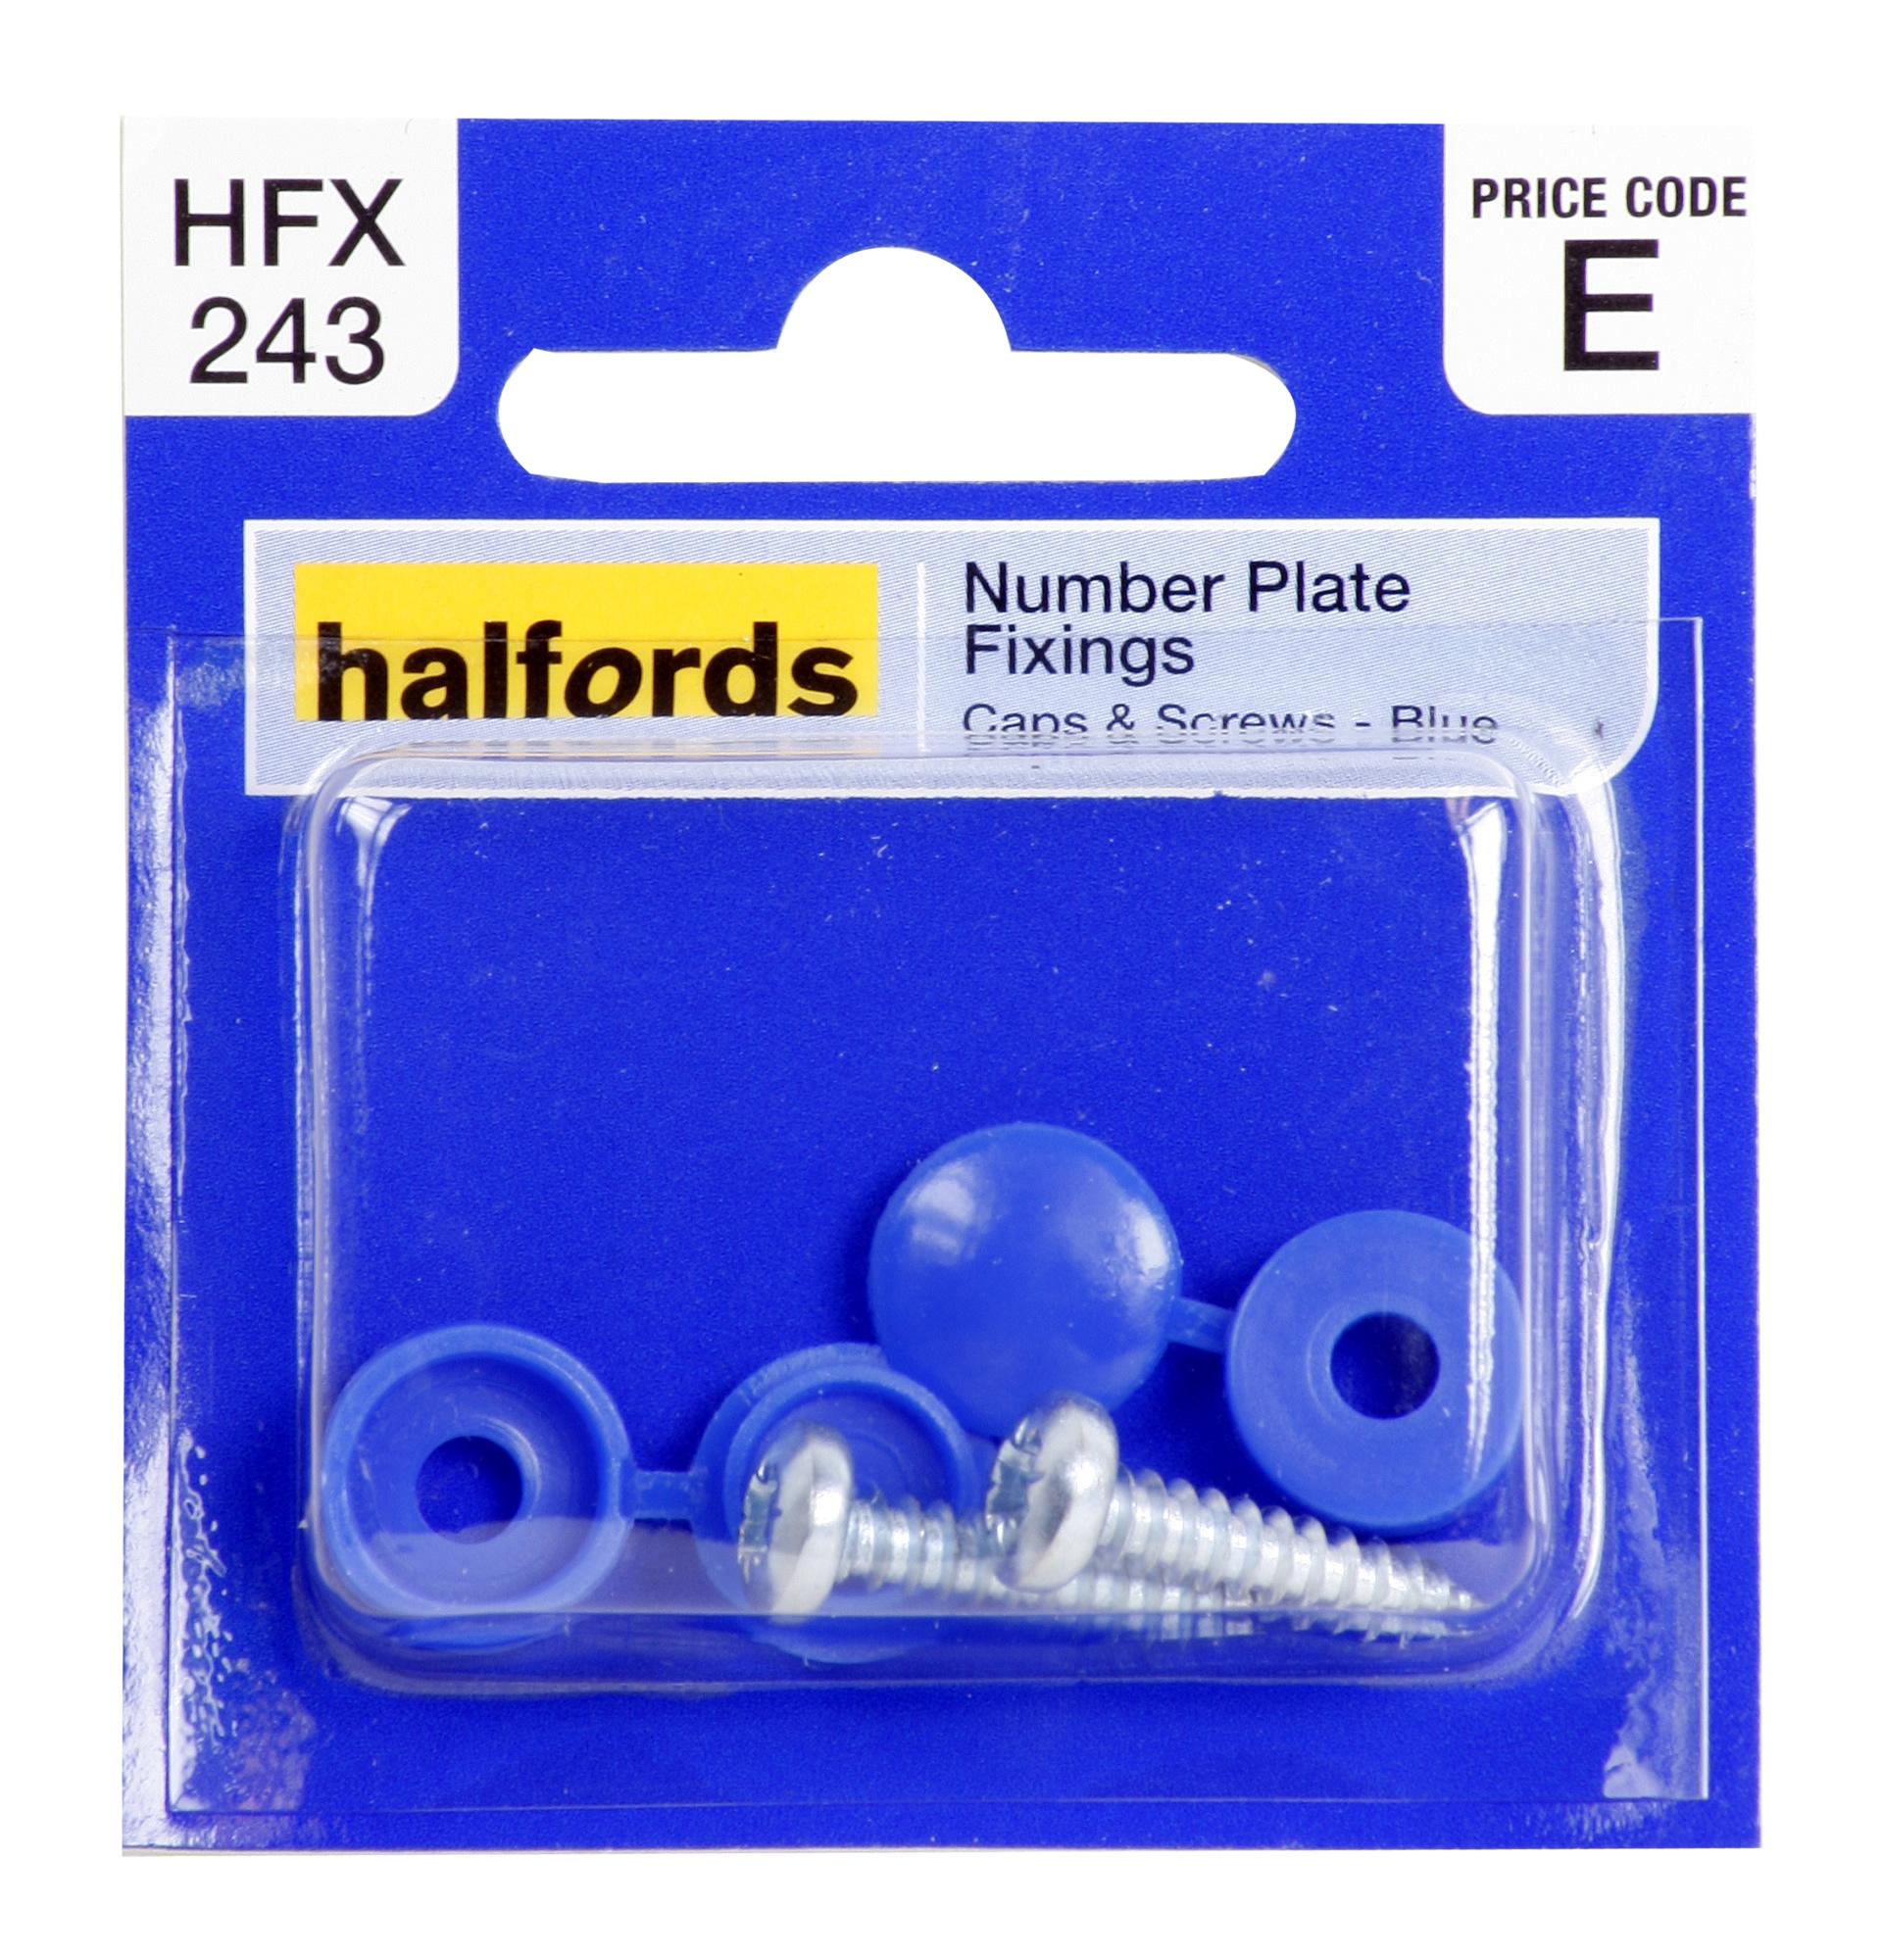 Halfords Number Plate Fixings - Blue Hfx243